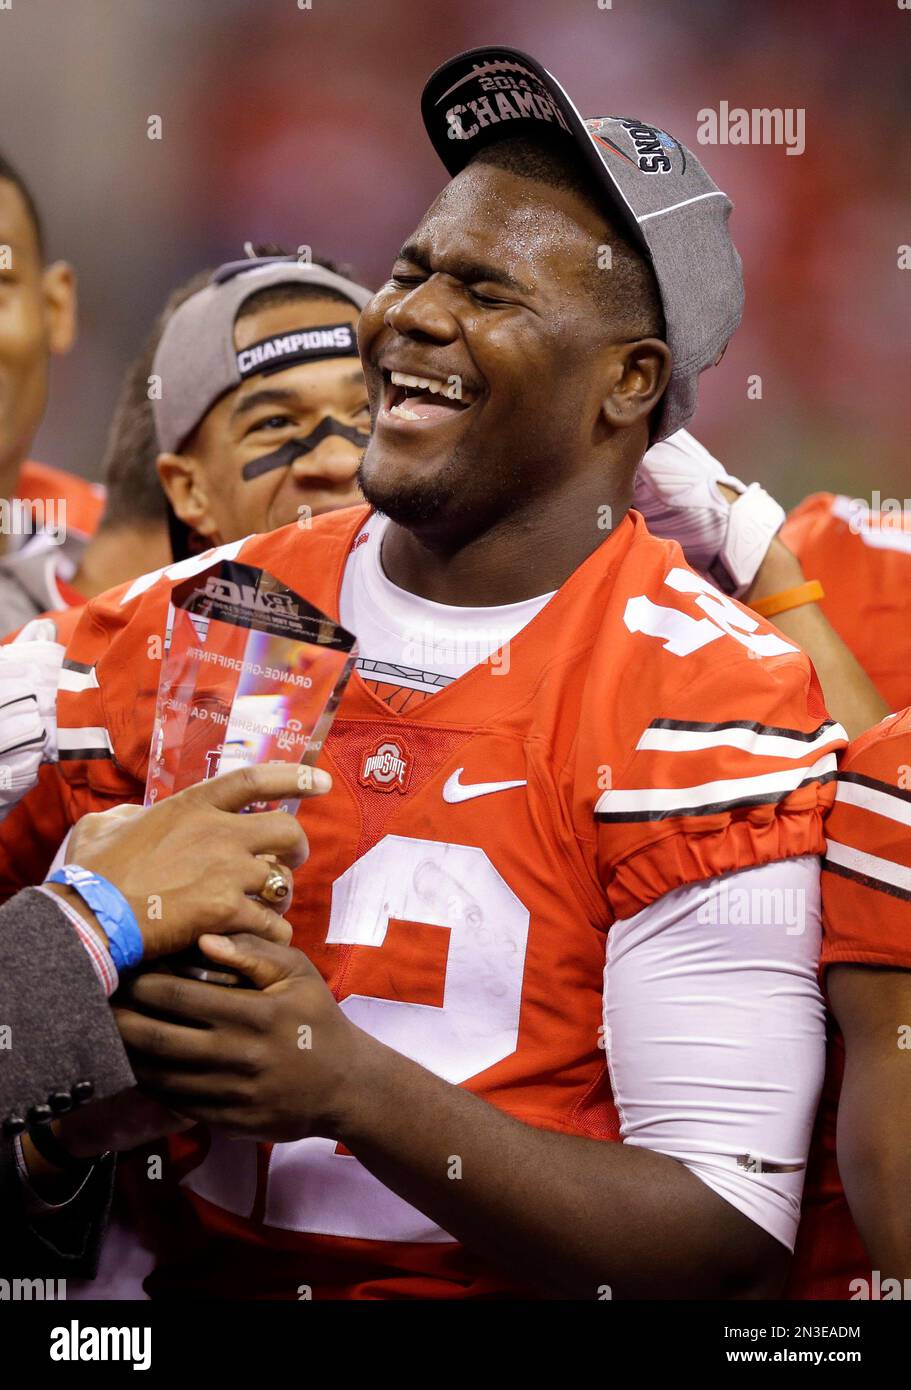 Ohio State quarterback Cardale Jones celebrates following the Big Ten Conference championship NCAA college football game after midnight Sunday, Dec. 7, 2014, in Indianapolis. Ohio State defeated Wisconsin 59-0. (AP Photo/Michael Conroy) Stock Photo